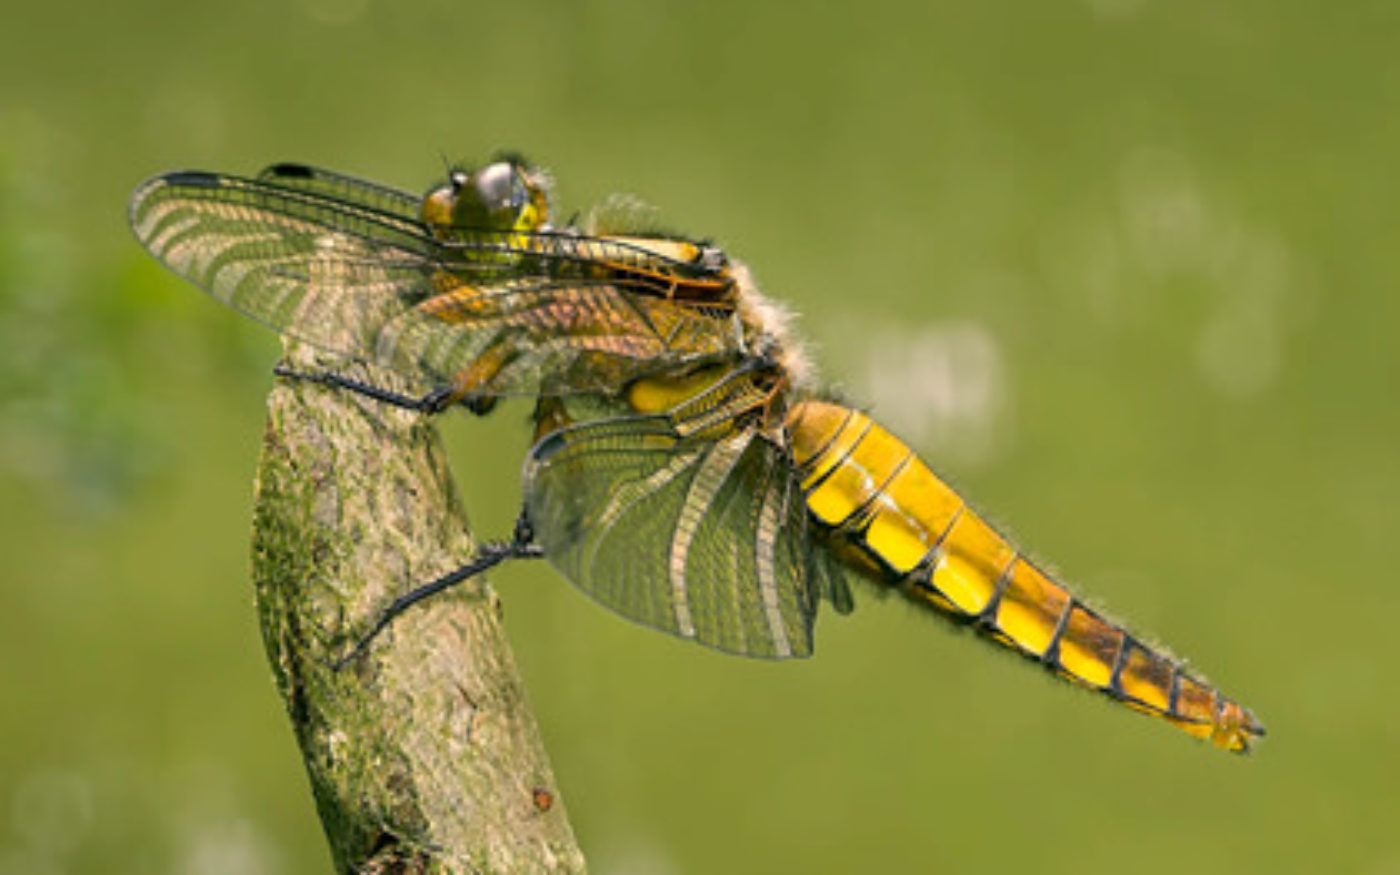 Tips for insect photography - Insect Week